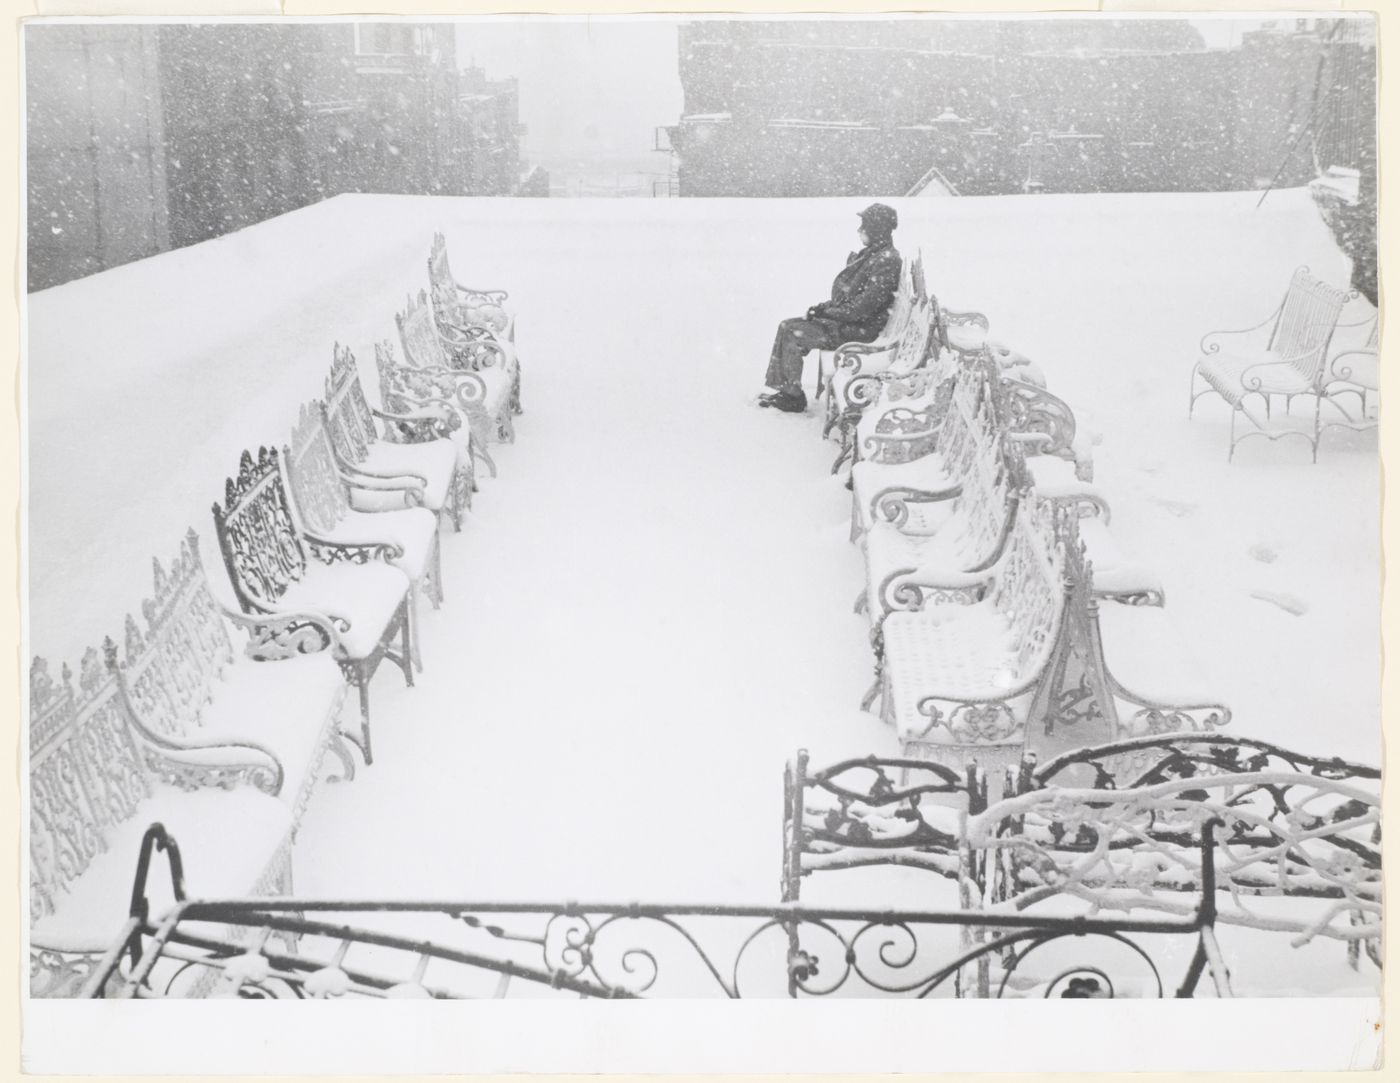 Man seated on bench in snow on rooftop of old Newell Art Galleries, New York City, New York